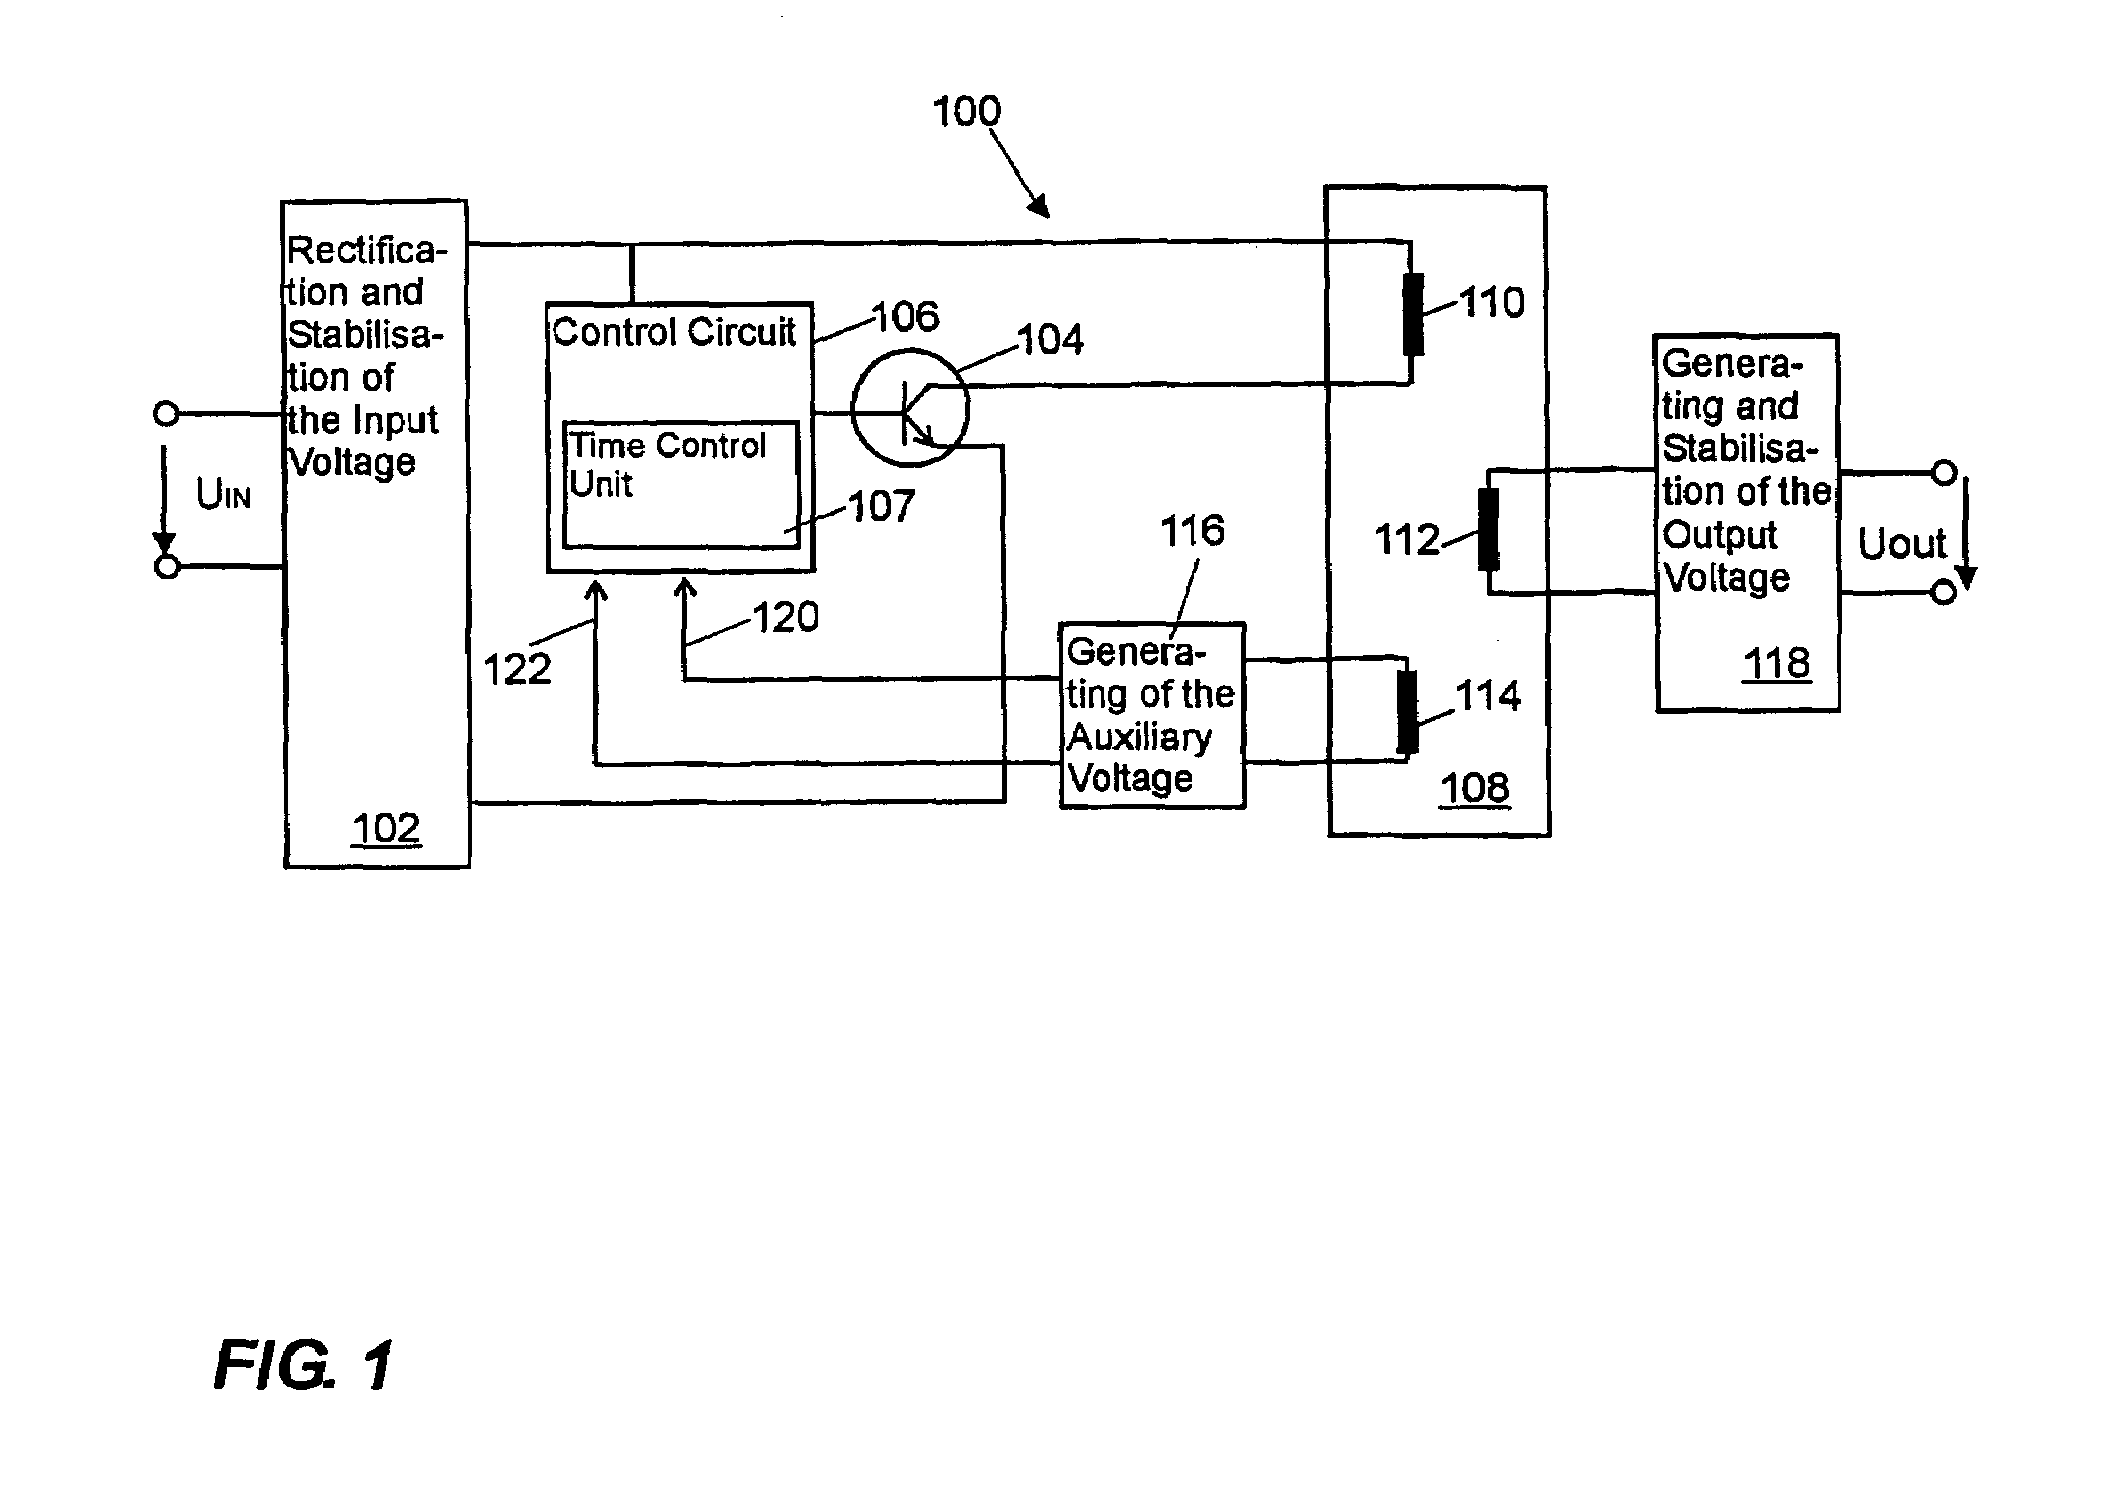 Simple switched-mode power supply with current and voltage limitation